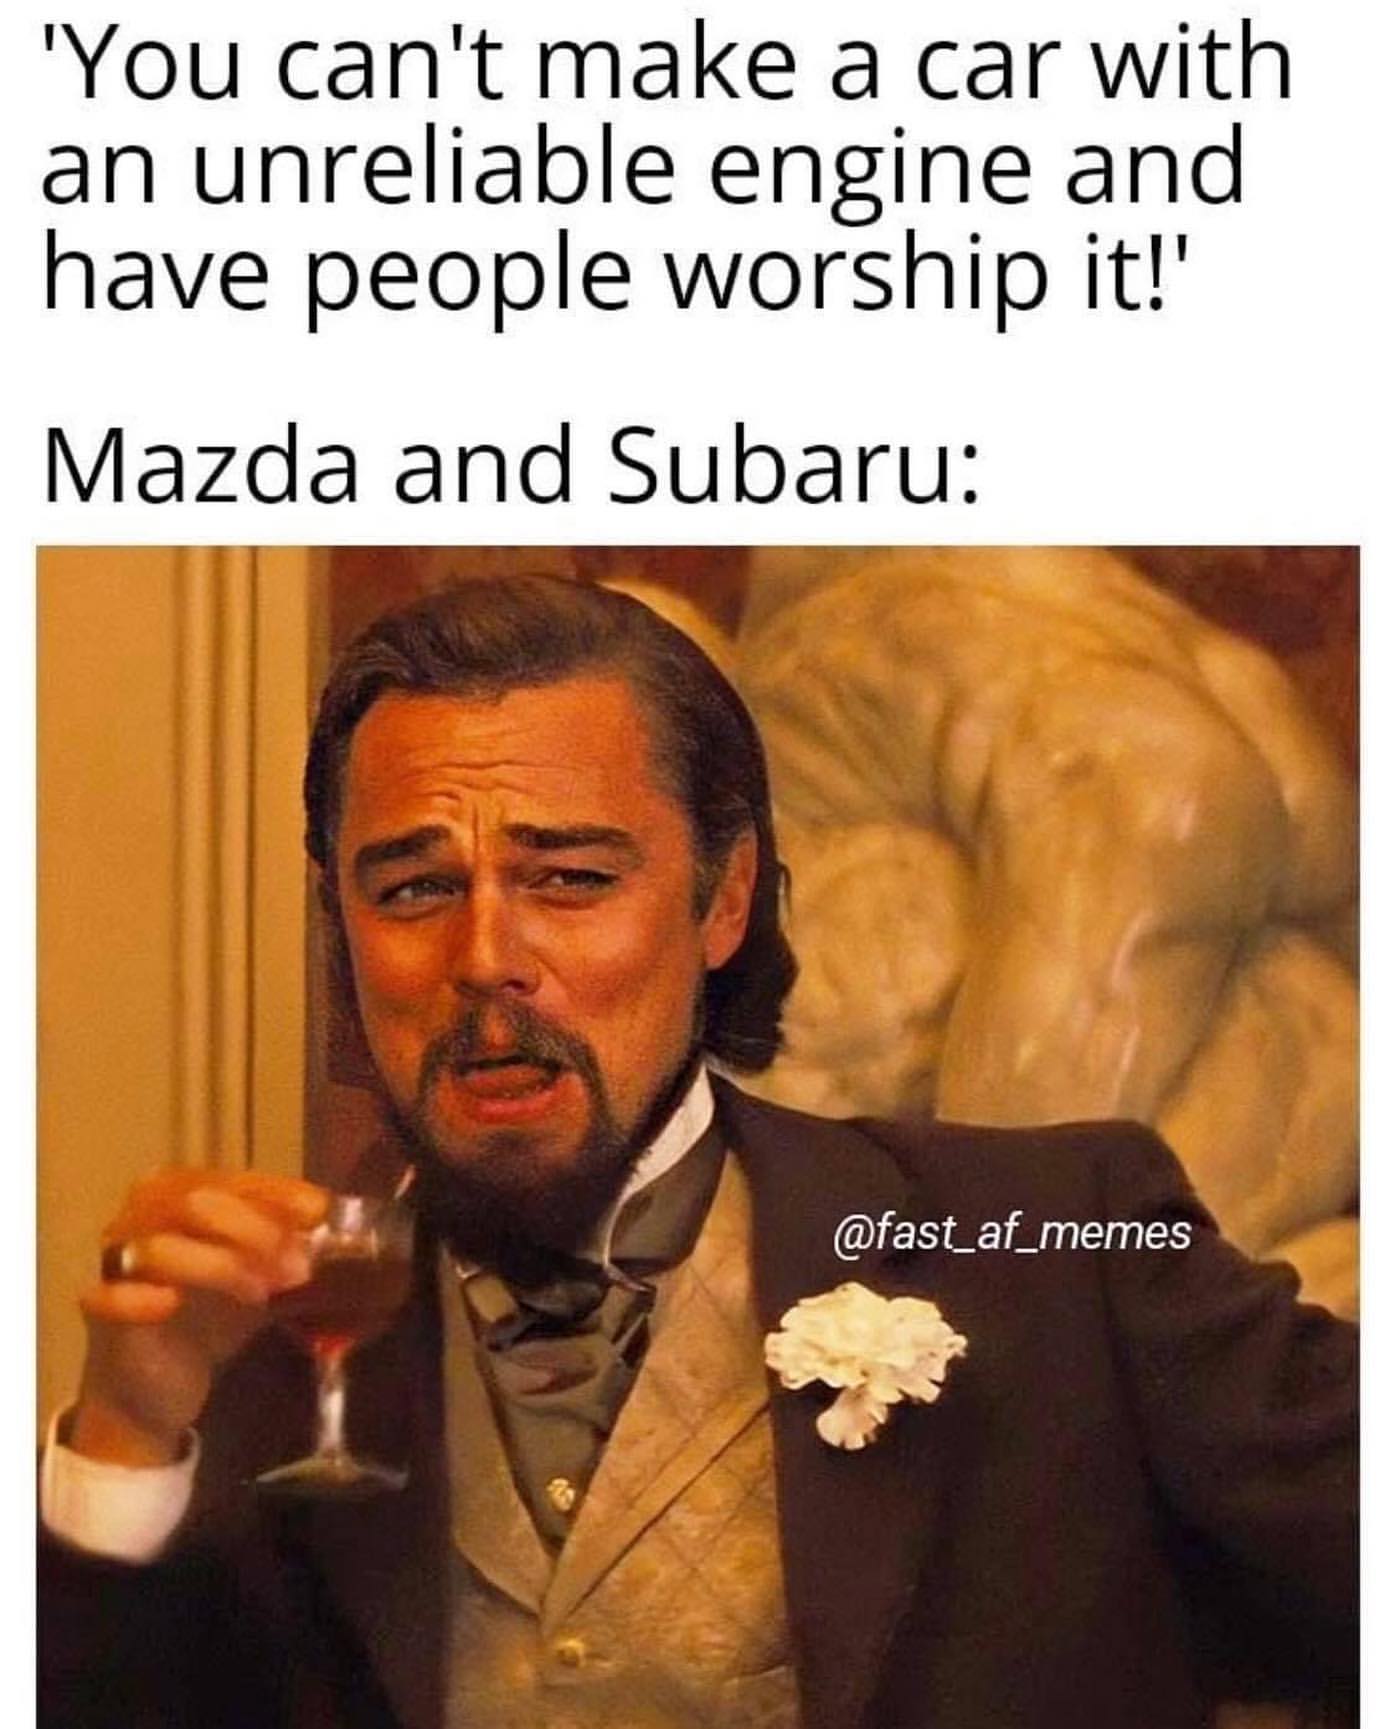 You can't make a car with an unreliable engine and have people worship it! Mazda and Subaru: